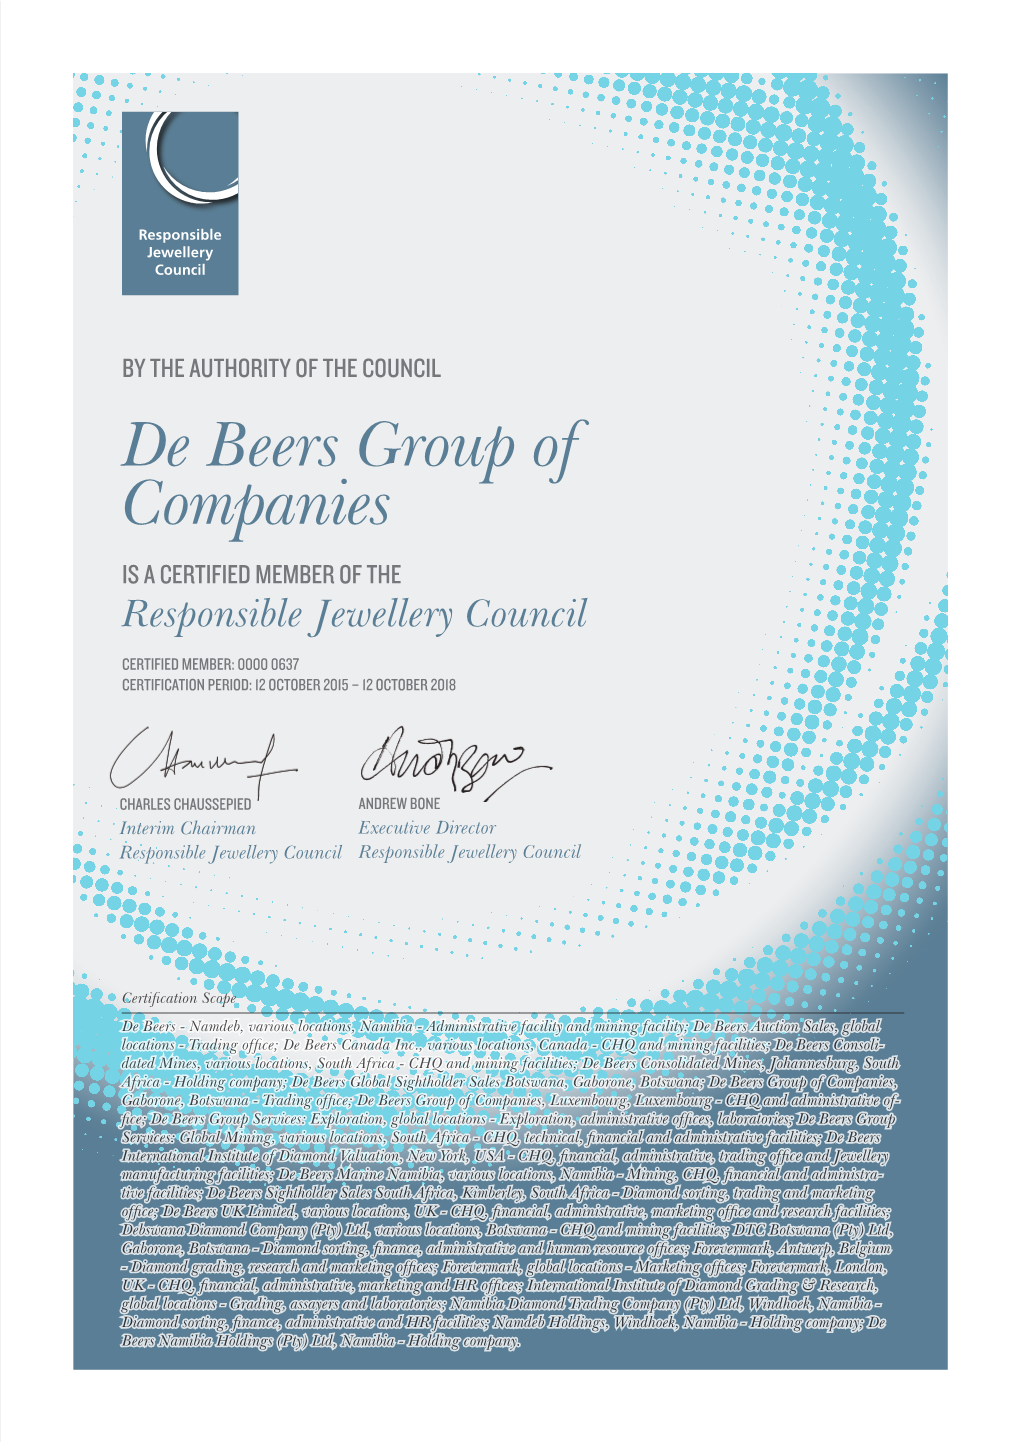 De Beers Group of Companies IS a CERTIFIED MEMBER of the Responsible Jewellery Council